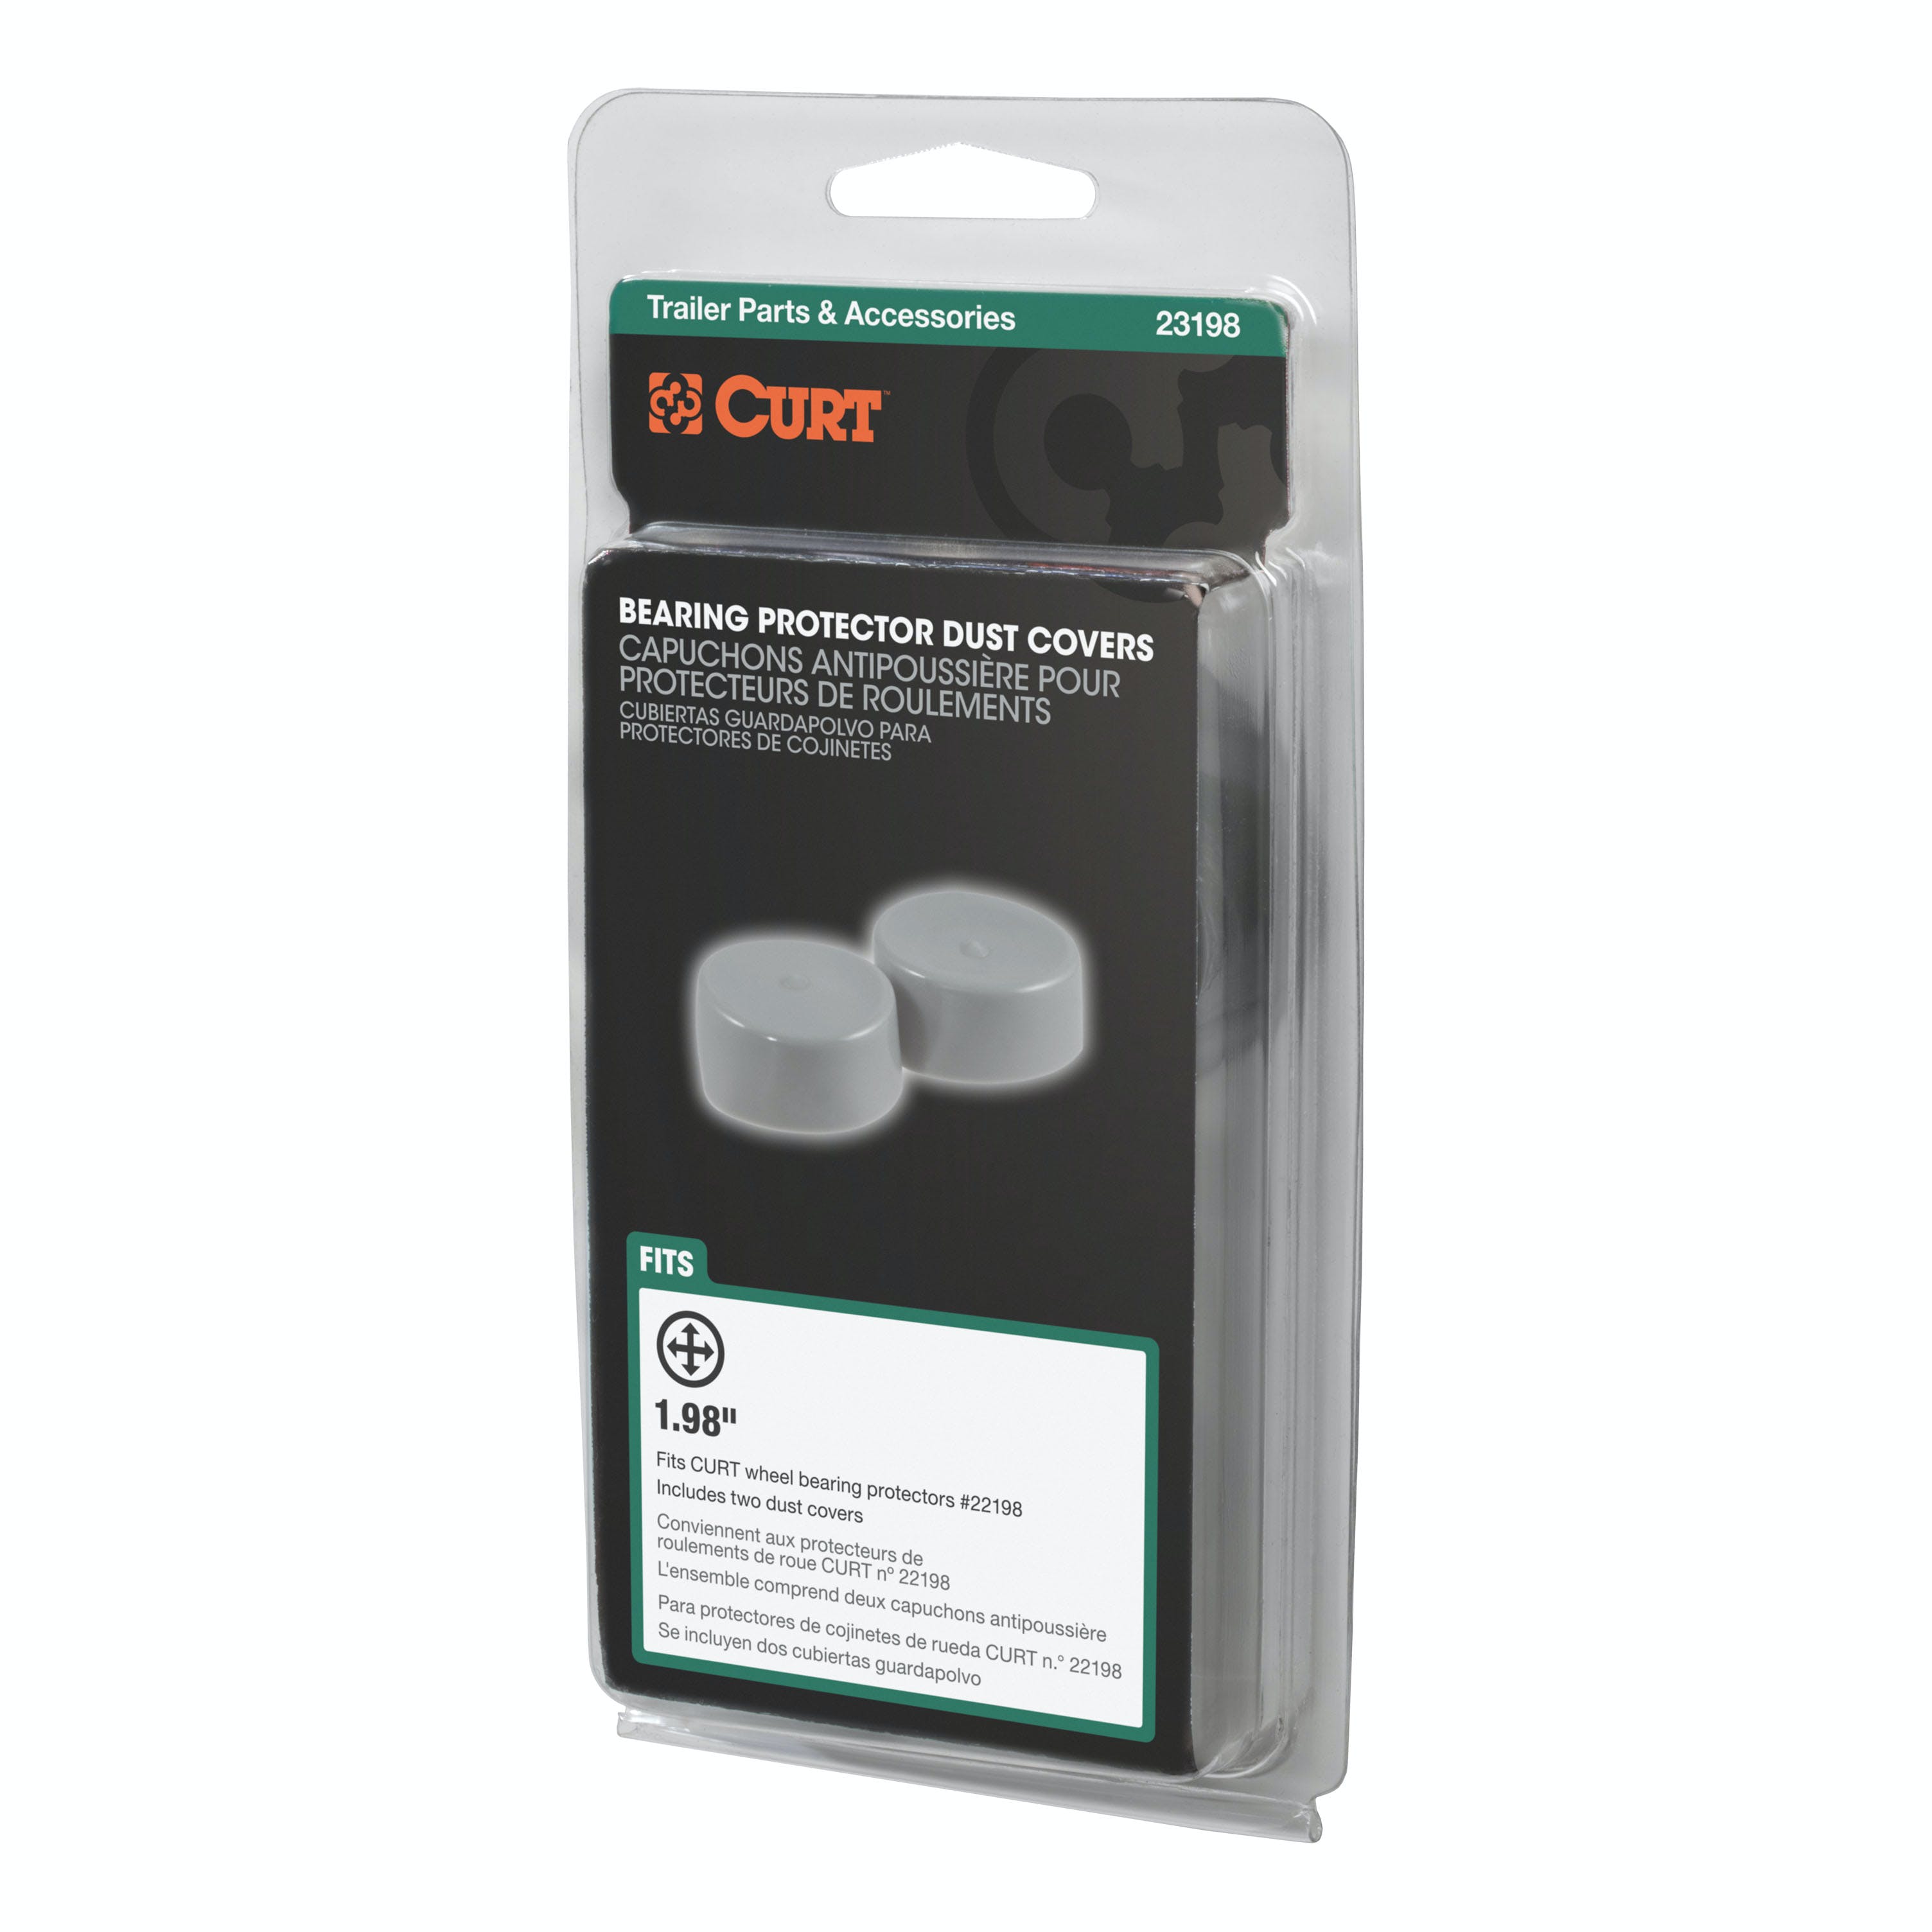 CURT 23198 1.98 Bearing Protector Dust Covers (2-Pack)